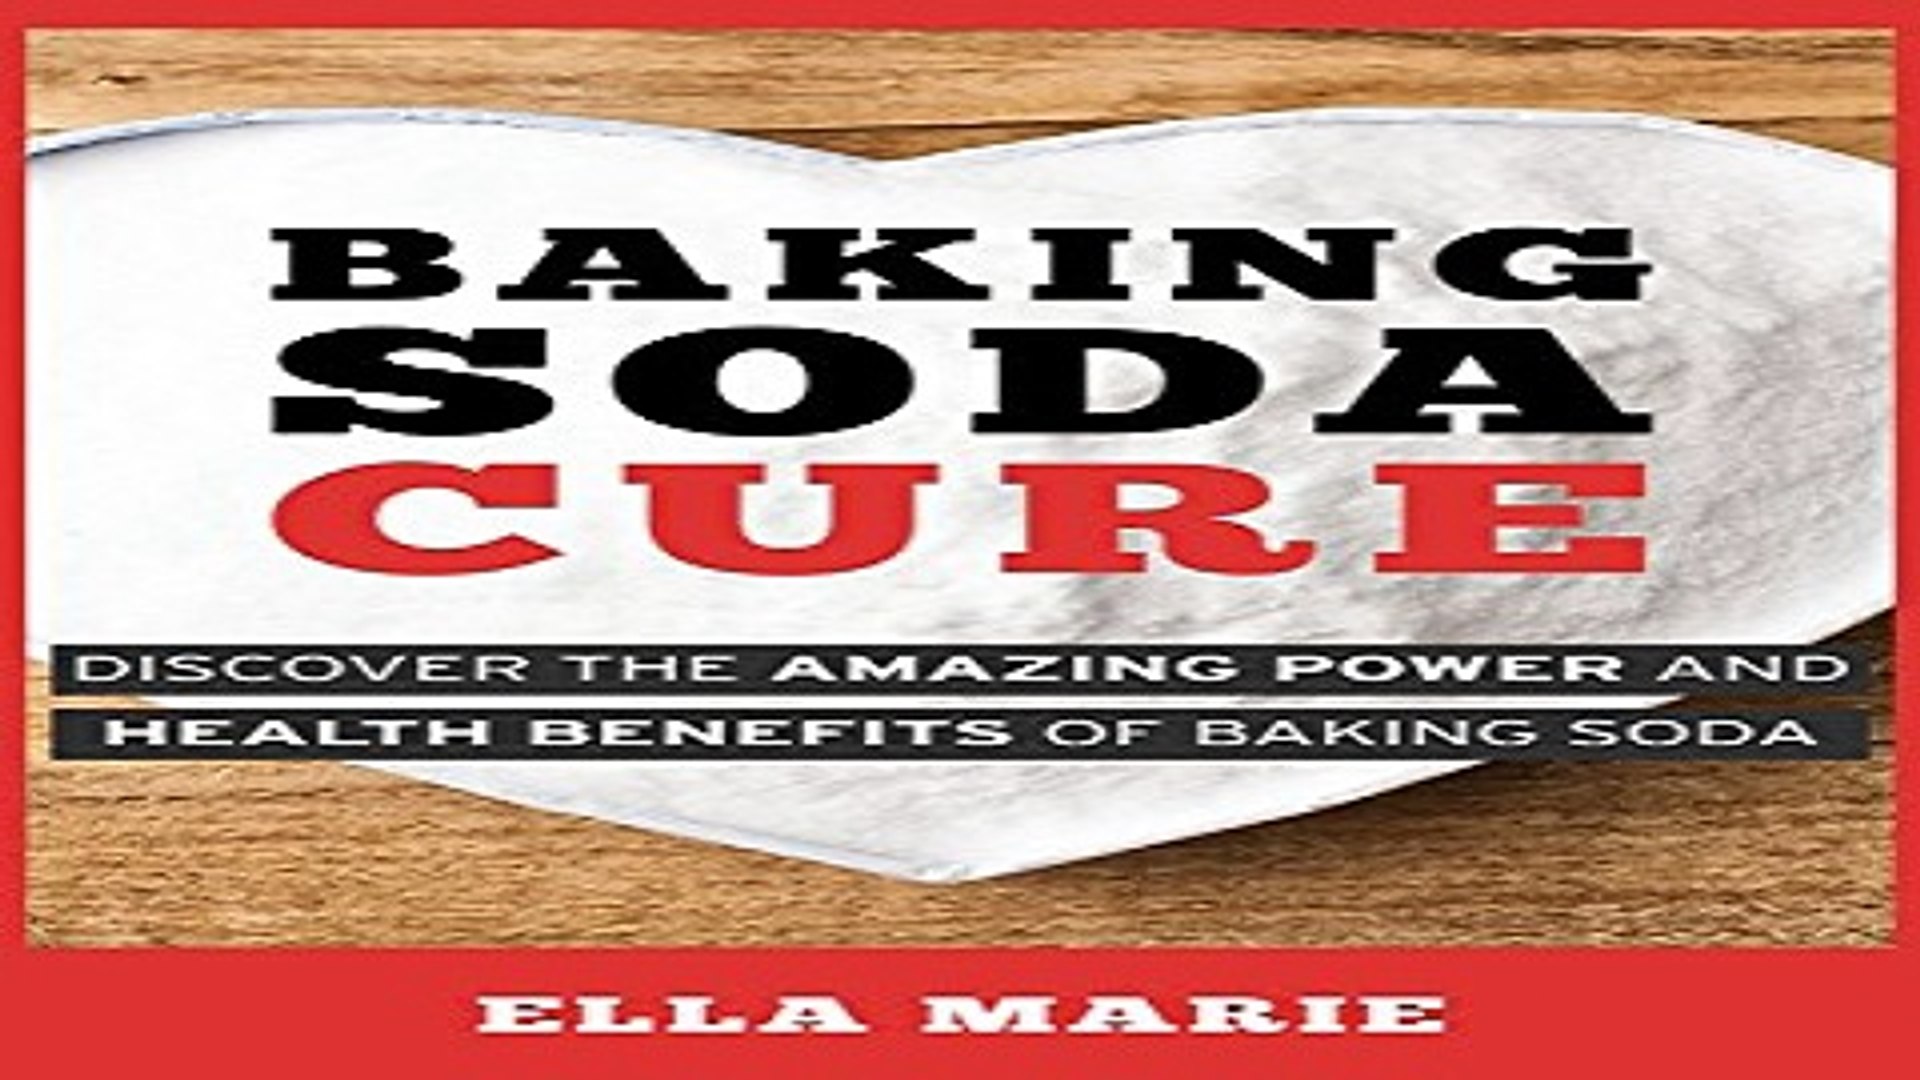 ⁣BAKING SODA  Baking Soda Cure   Discover the Amazing Power and Health Benefits of Baking Soda For